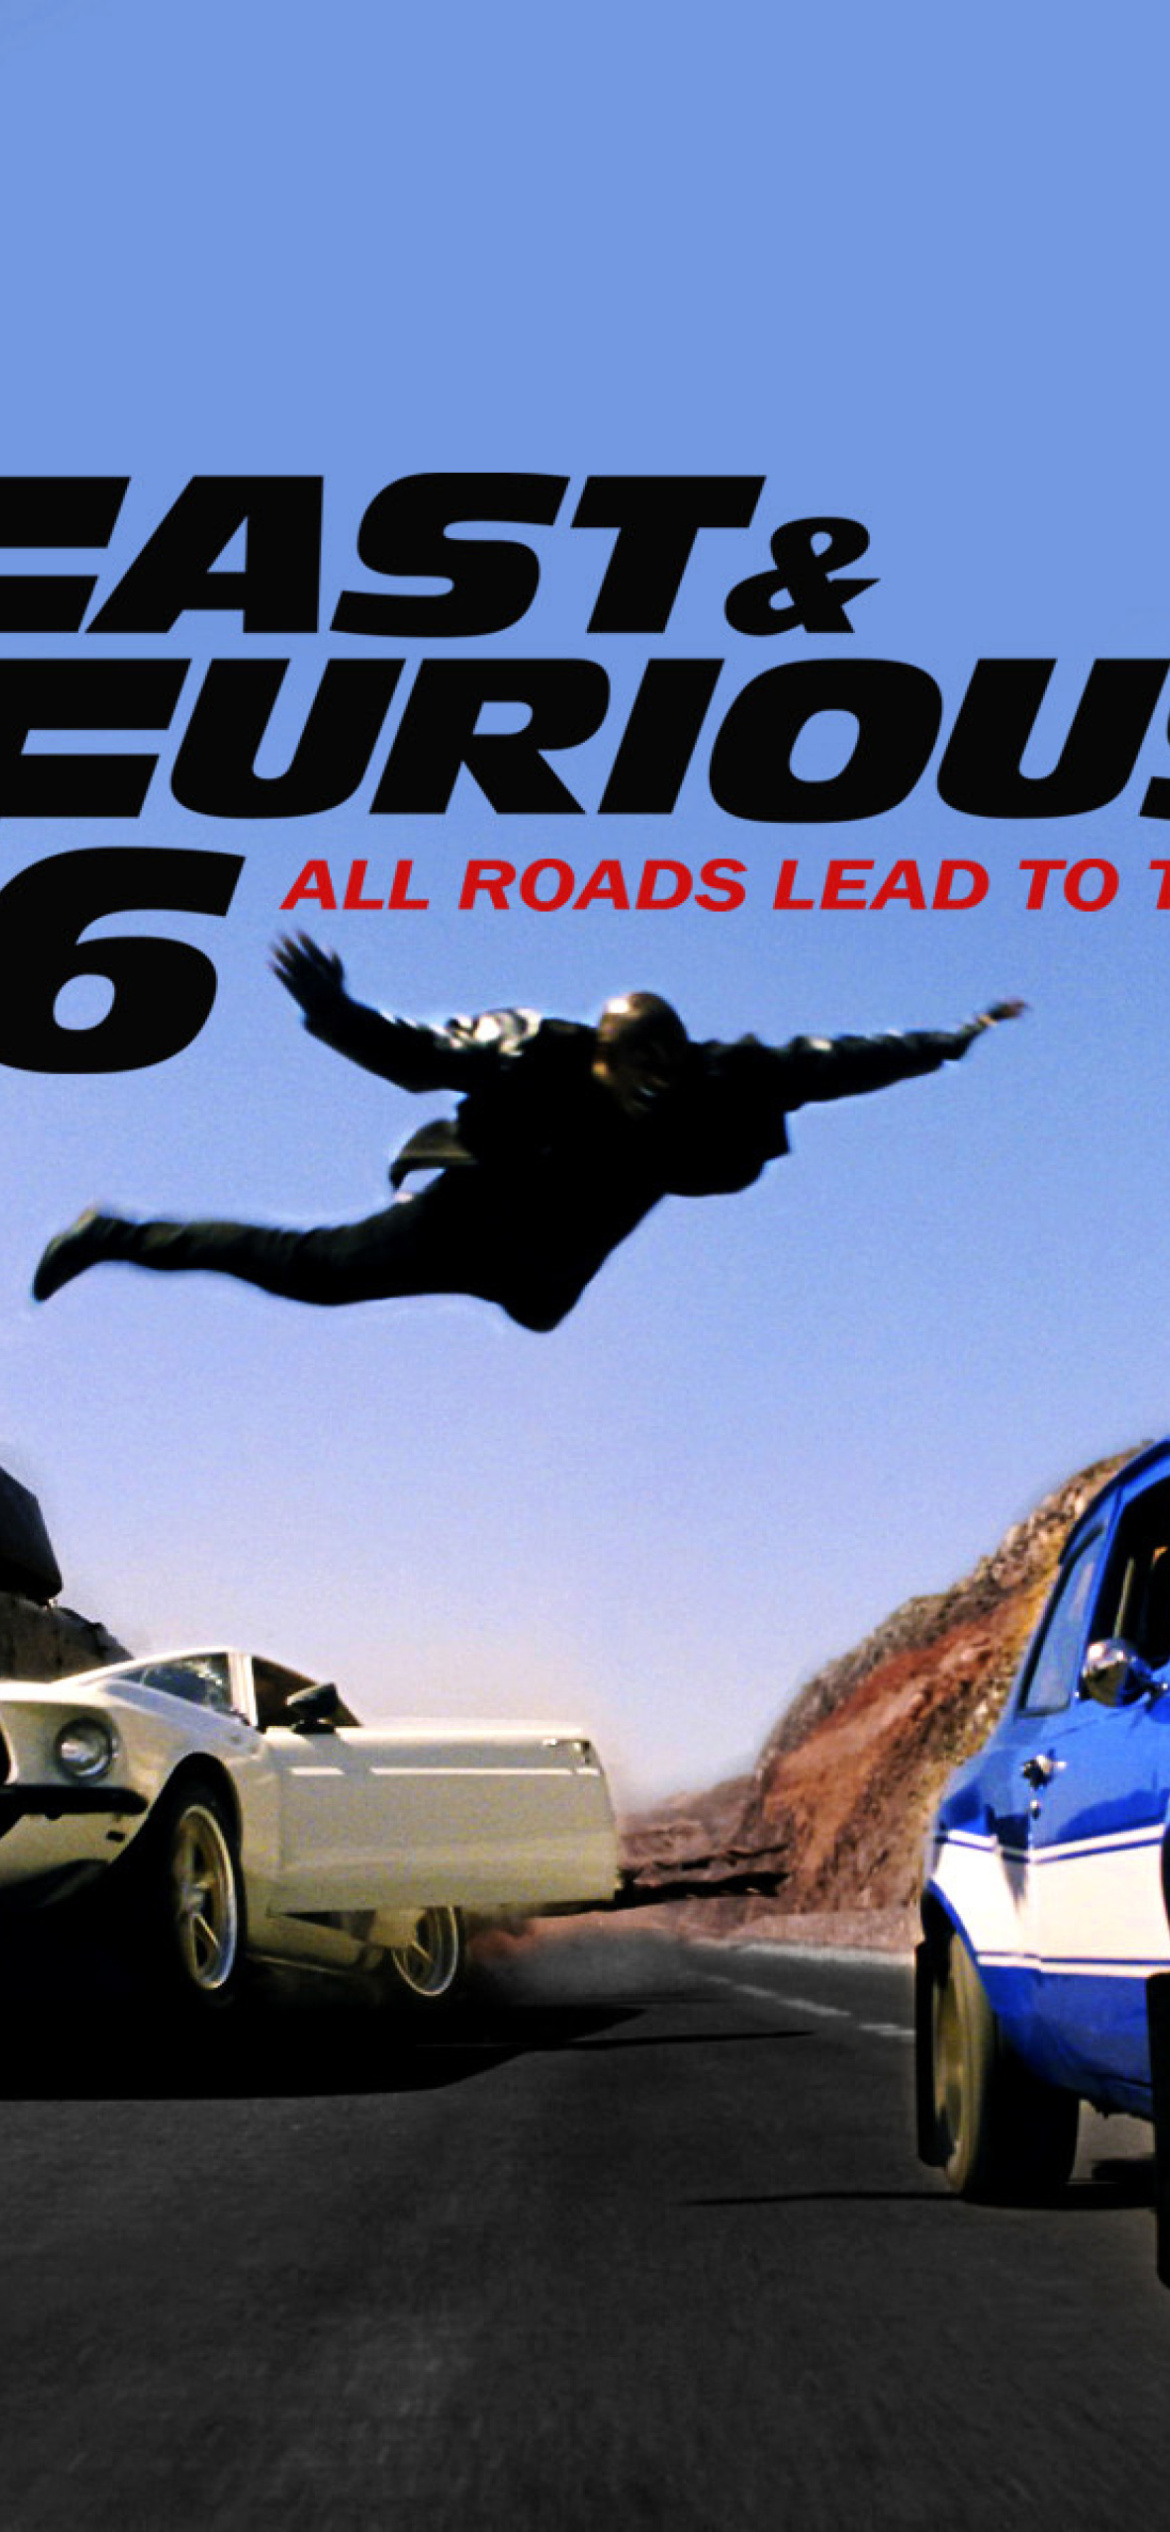 Fast and furious 6 Trailer wallpaper 1170x2532